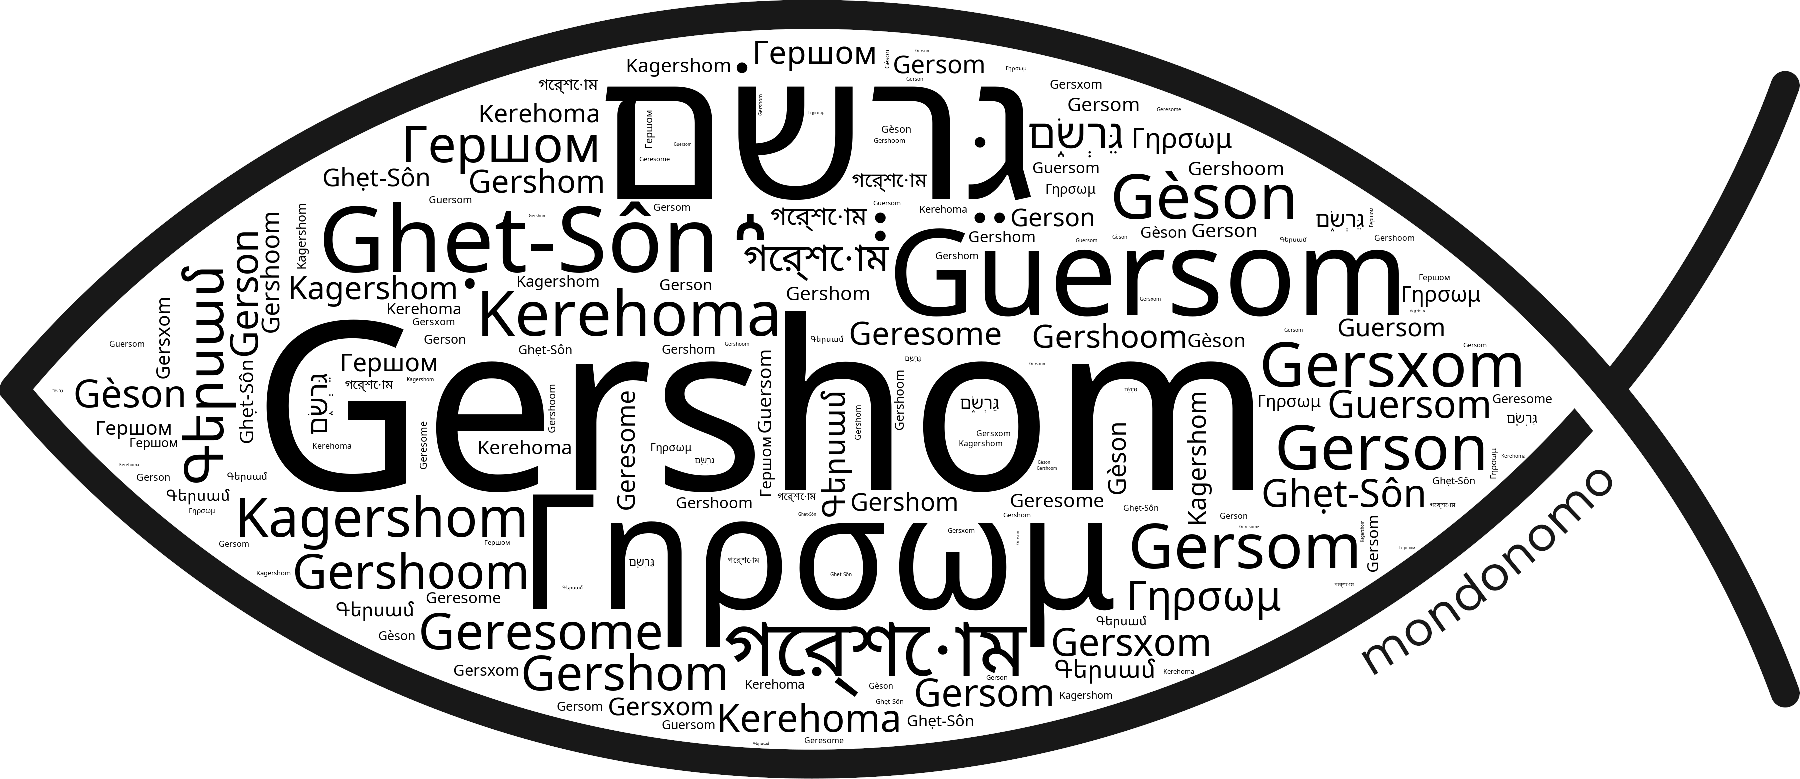 Name Gershom in the world's Bibles